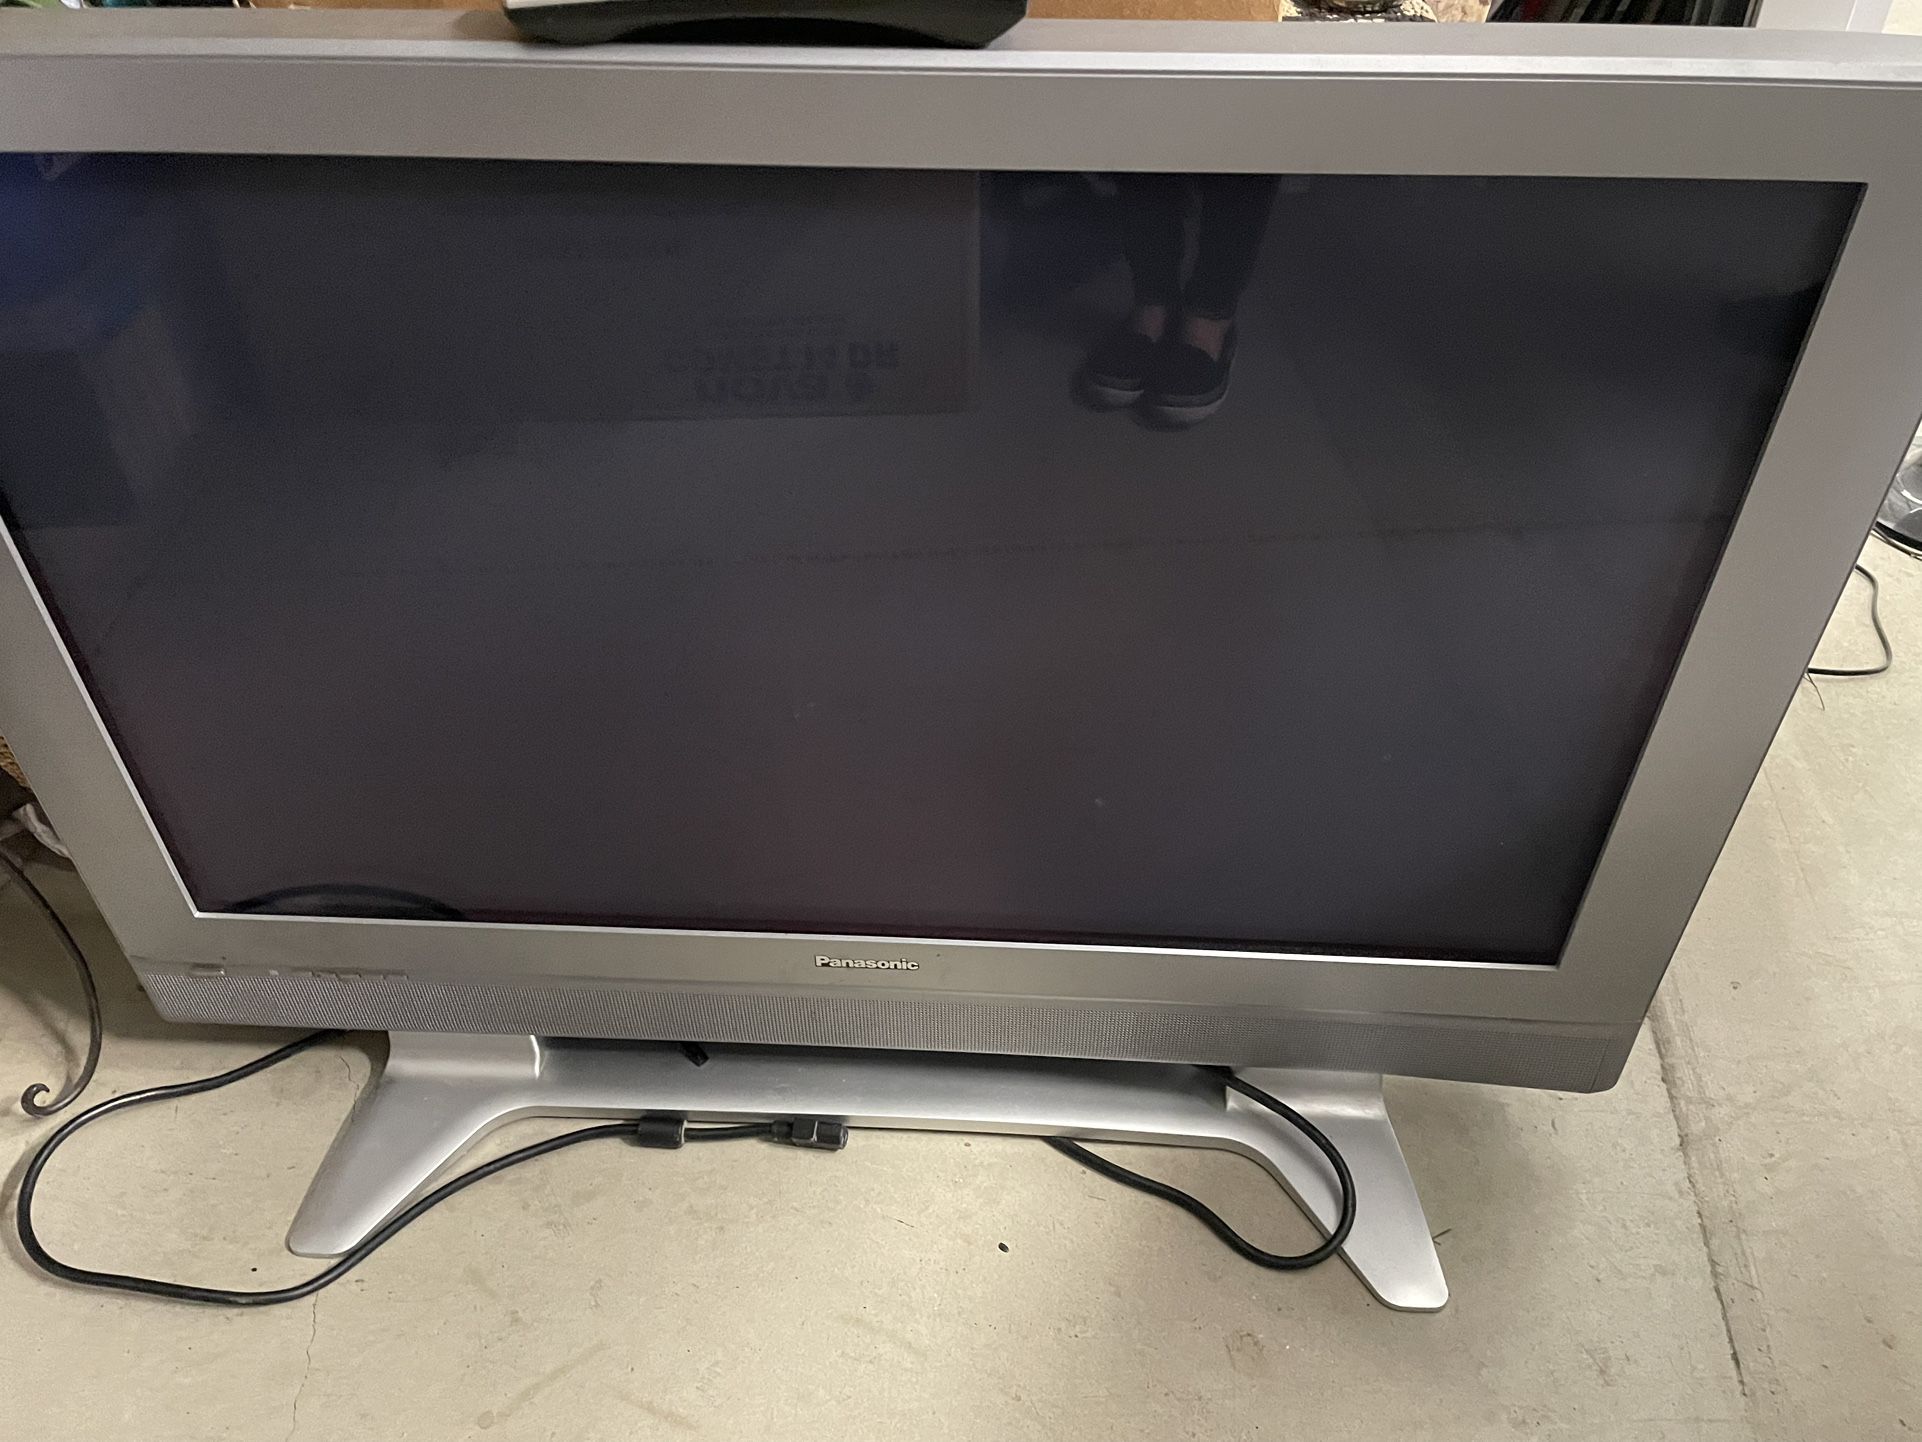 Panasonic 41 Inch Flat Screen Tv With Remote